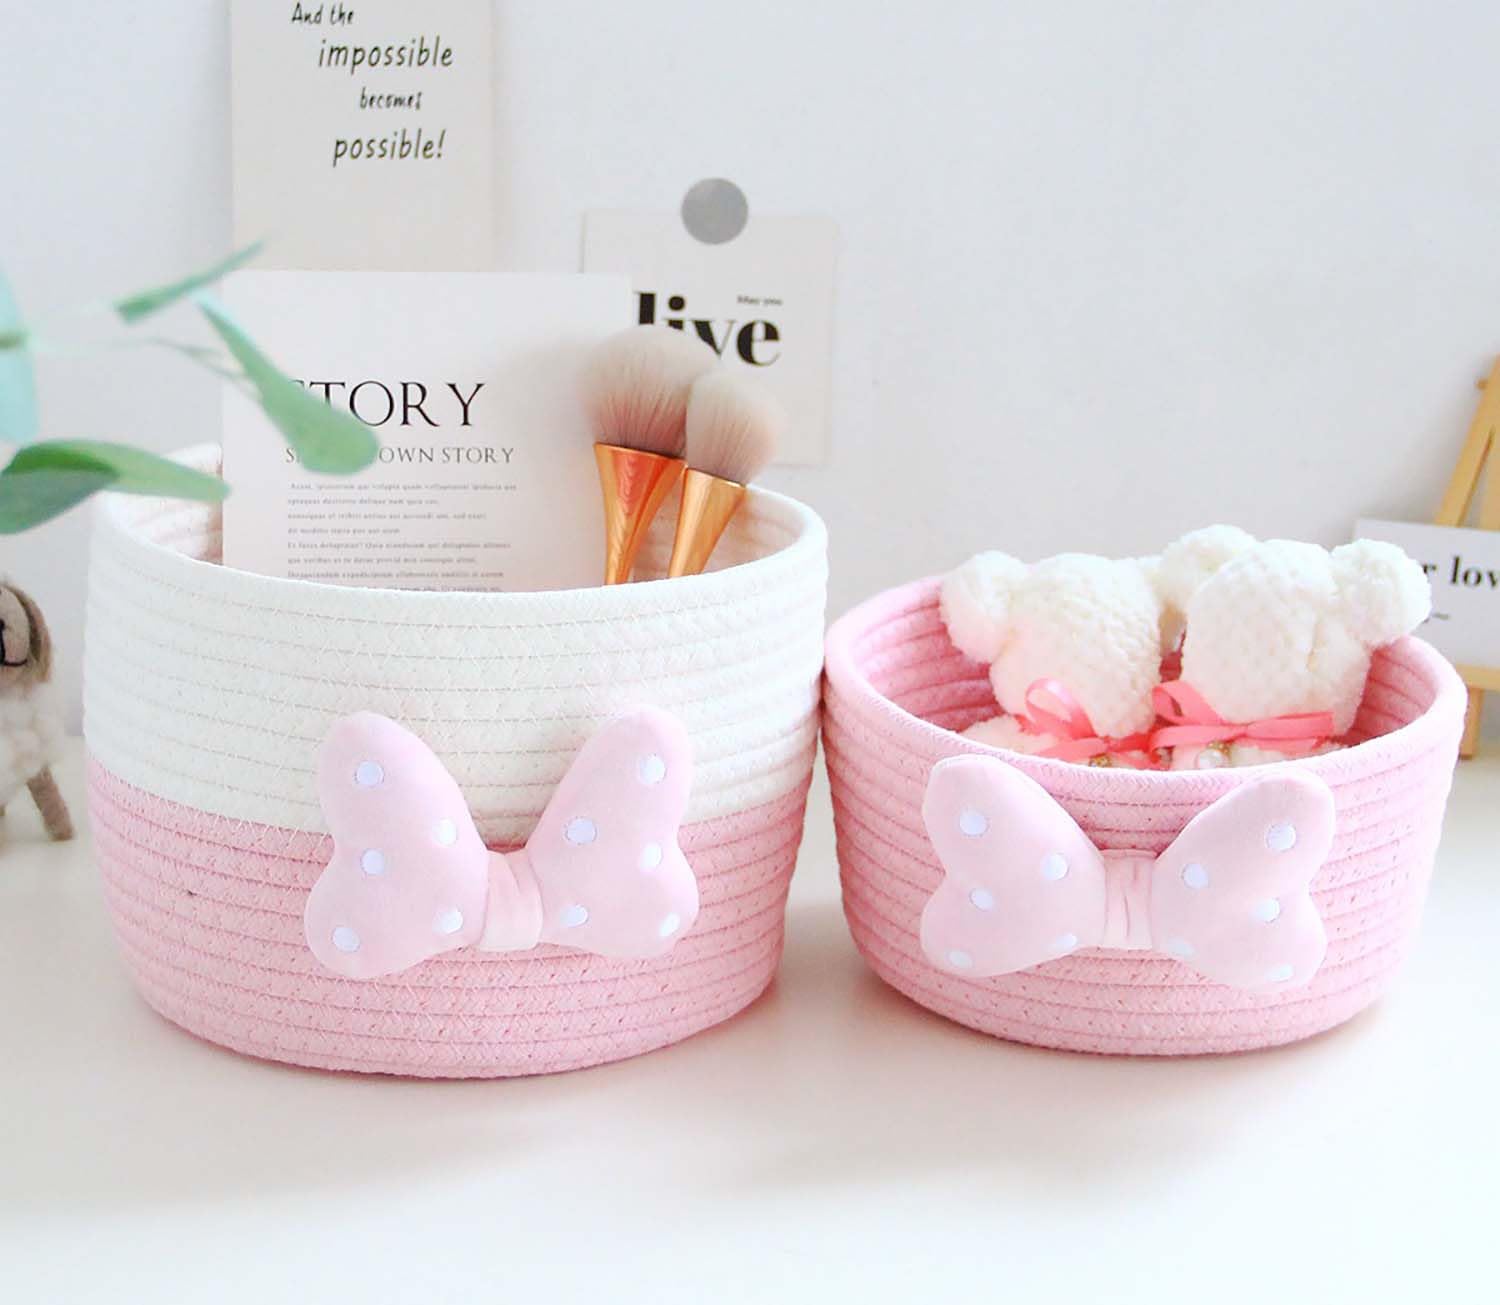 Kamuavni Decorative Storage Baskets Cartoon Woven Baskets for Home Decor and Organizing Small Shelf Baskets for Gilrs/Women Makeup Storage Basket -2 Pack,Pink